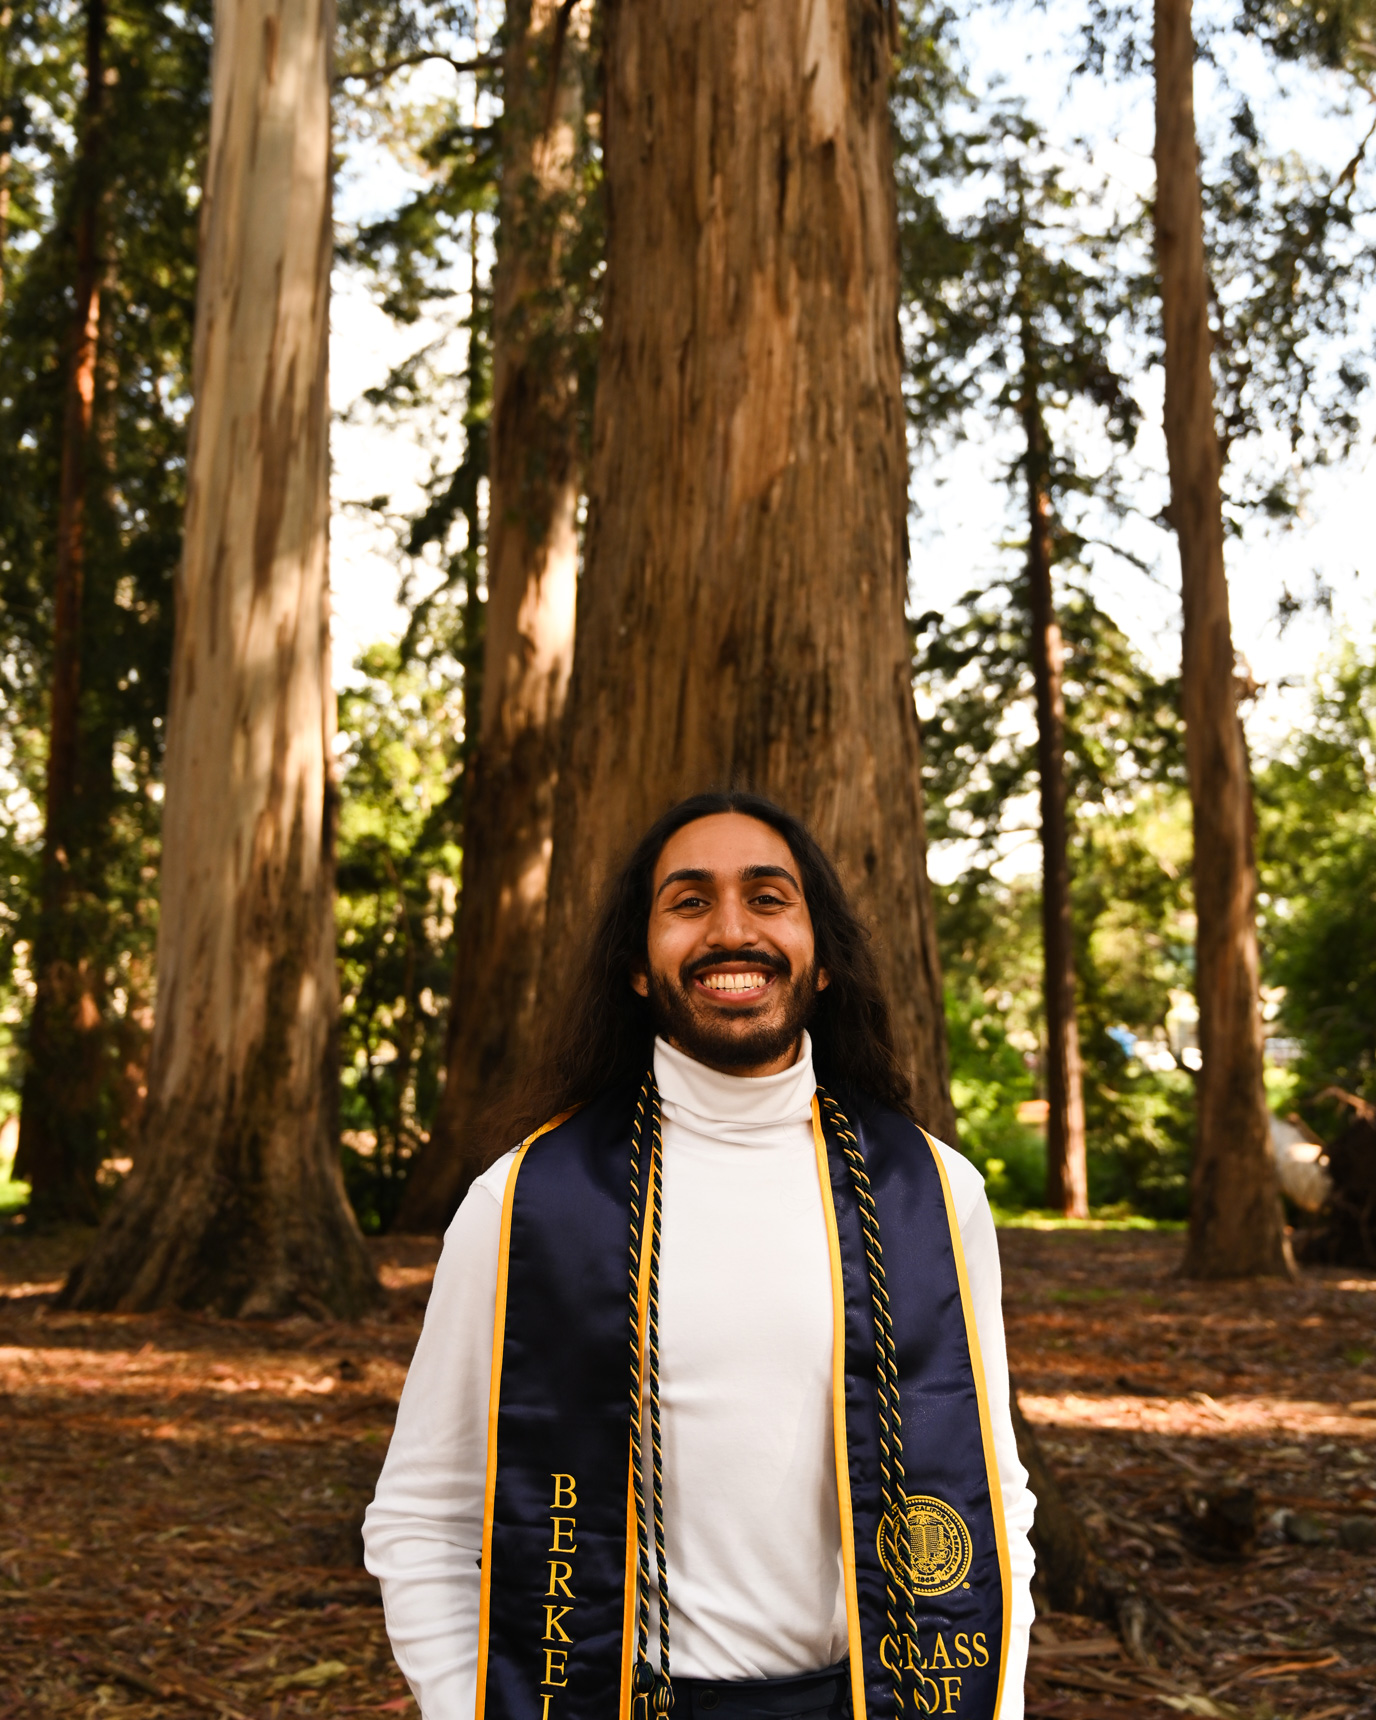 A graduation photo of Wanees Hannan in front of eucalyptus trees on the UC Berkeley campus.